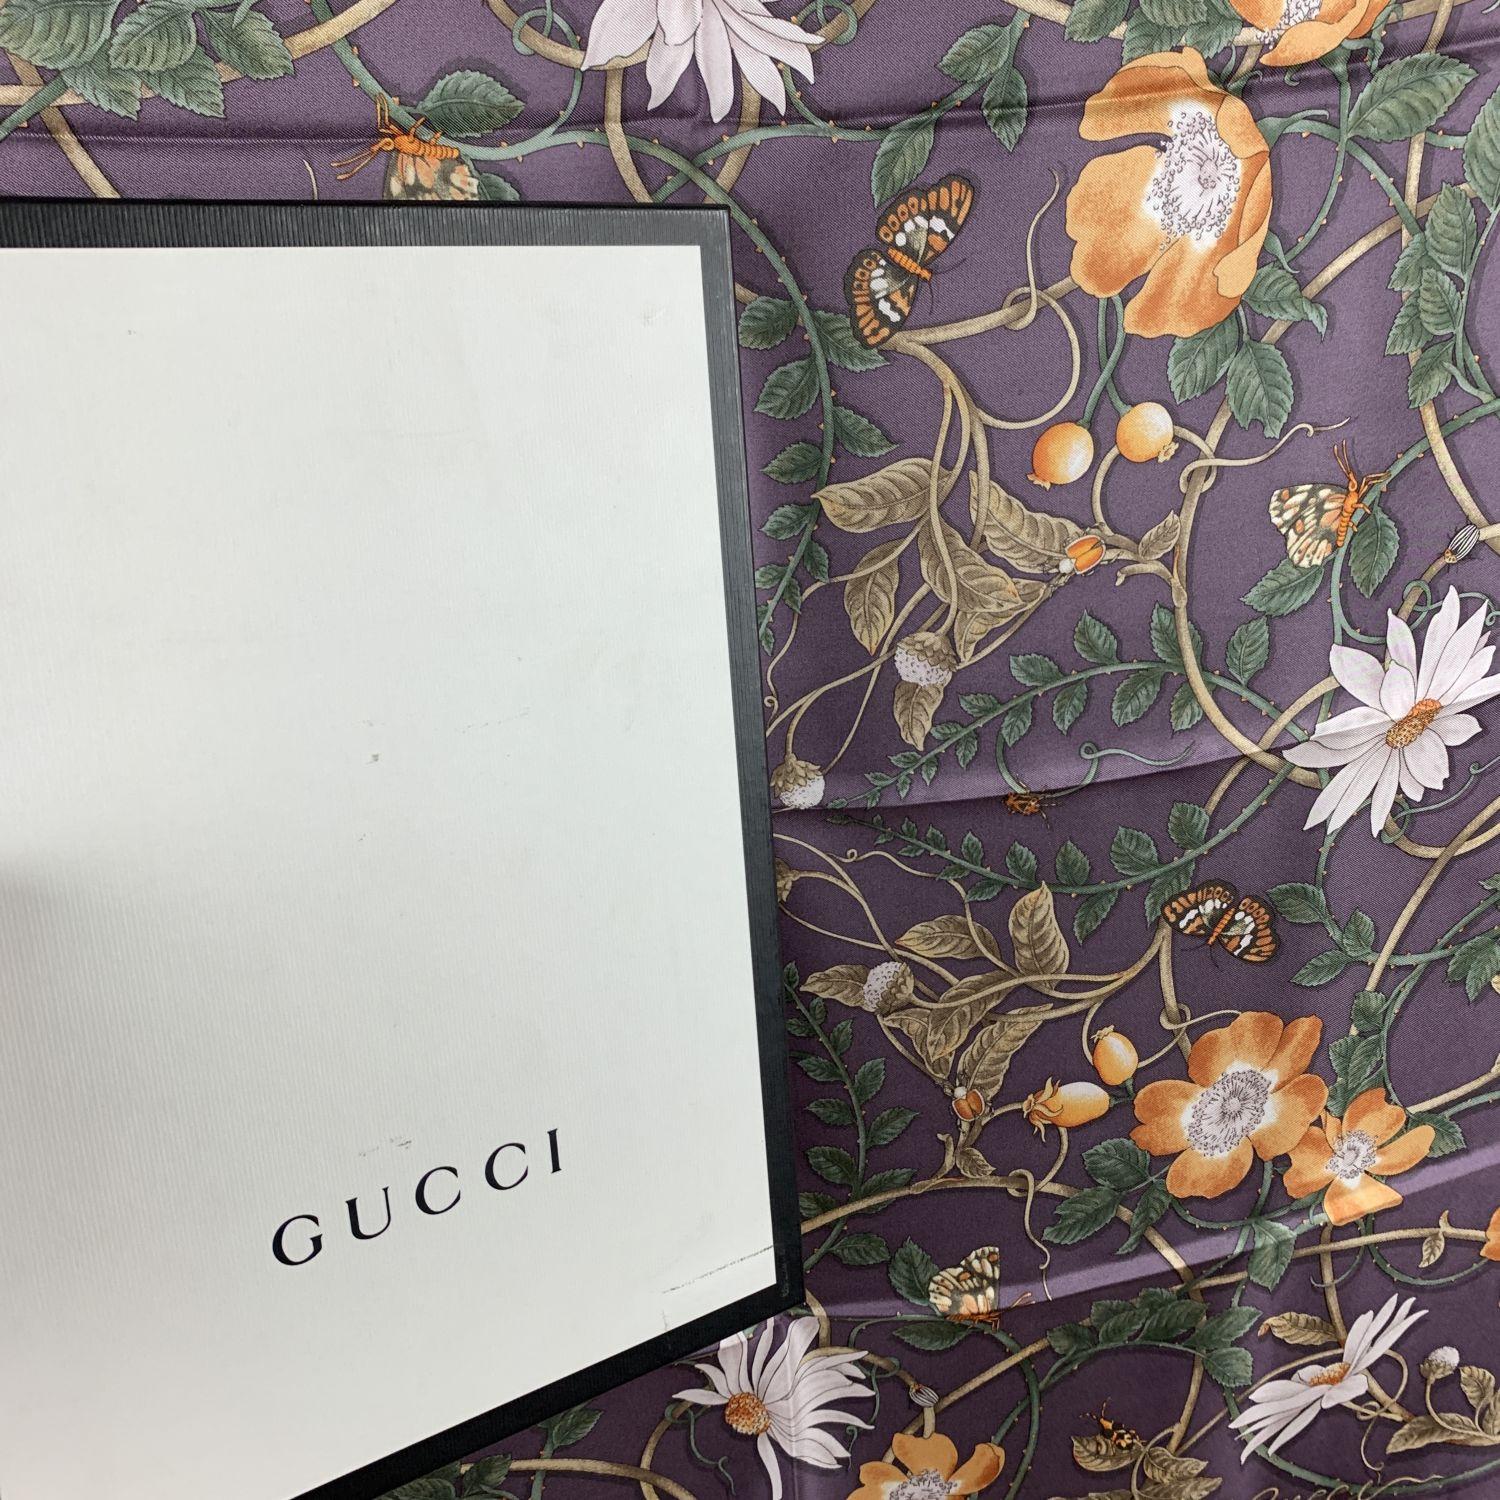 Gucci silk twill scarf Flower Webby with multicolor garden floral print. Purple color. Composition: 100% Silk. Measurements: 35.5 x 35.5 inches - 90 x 90 cm. Made in Italy

Details

MATERIAL: Silk

COLOR: Purple

MODEL: Flower Webby Scarf

GENDER: